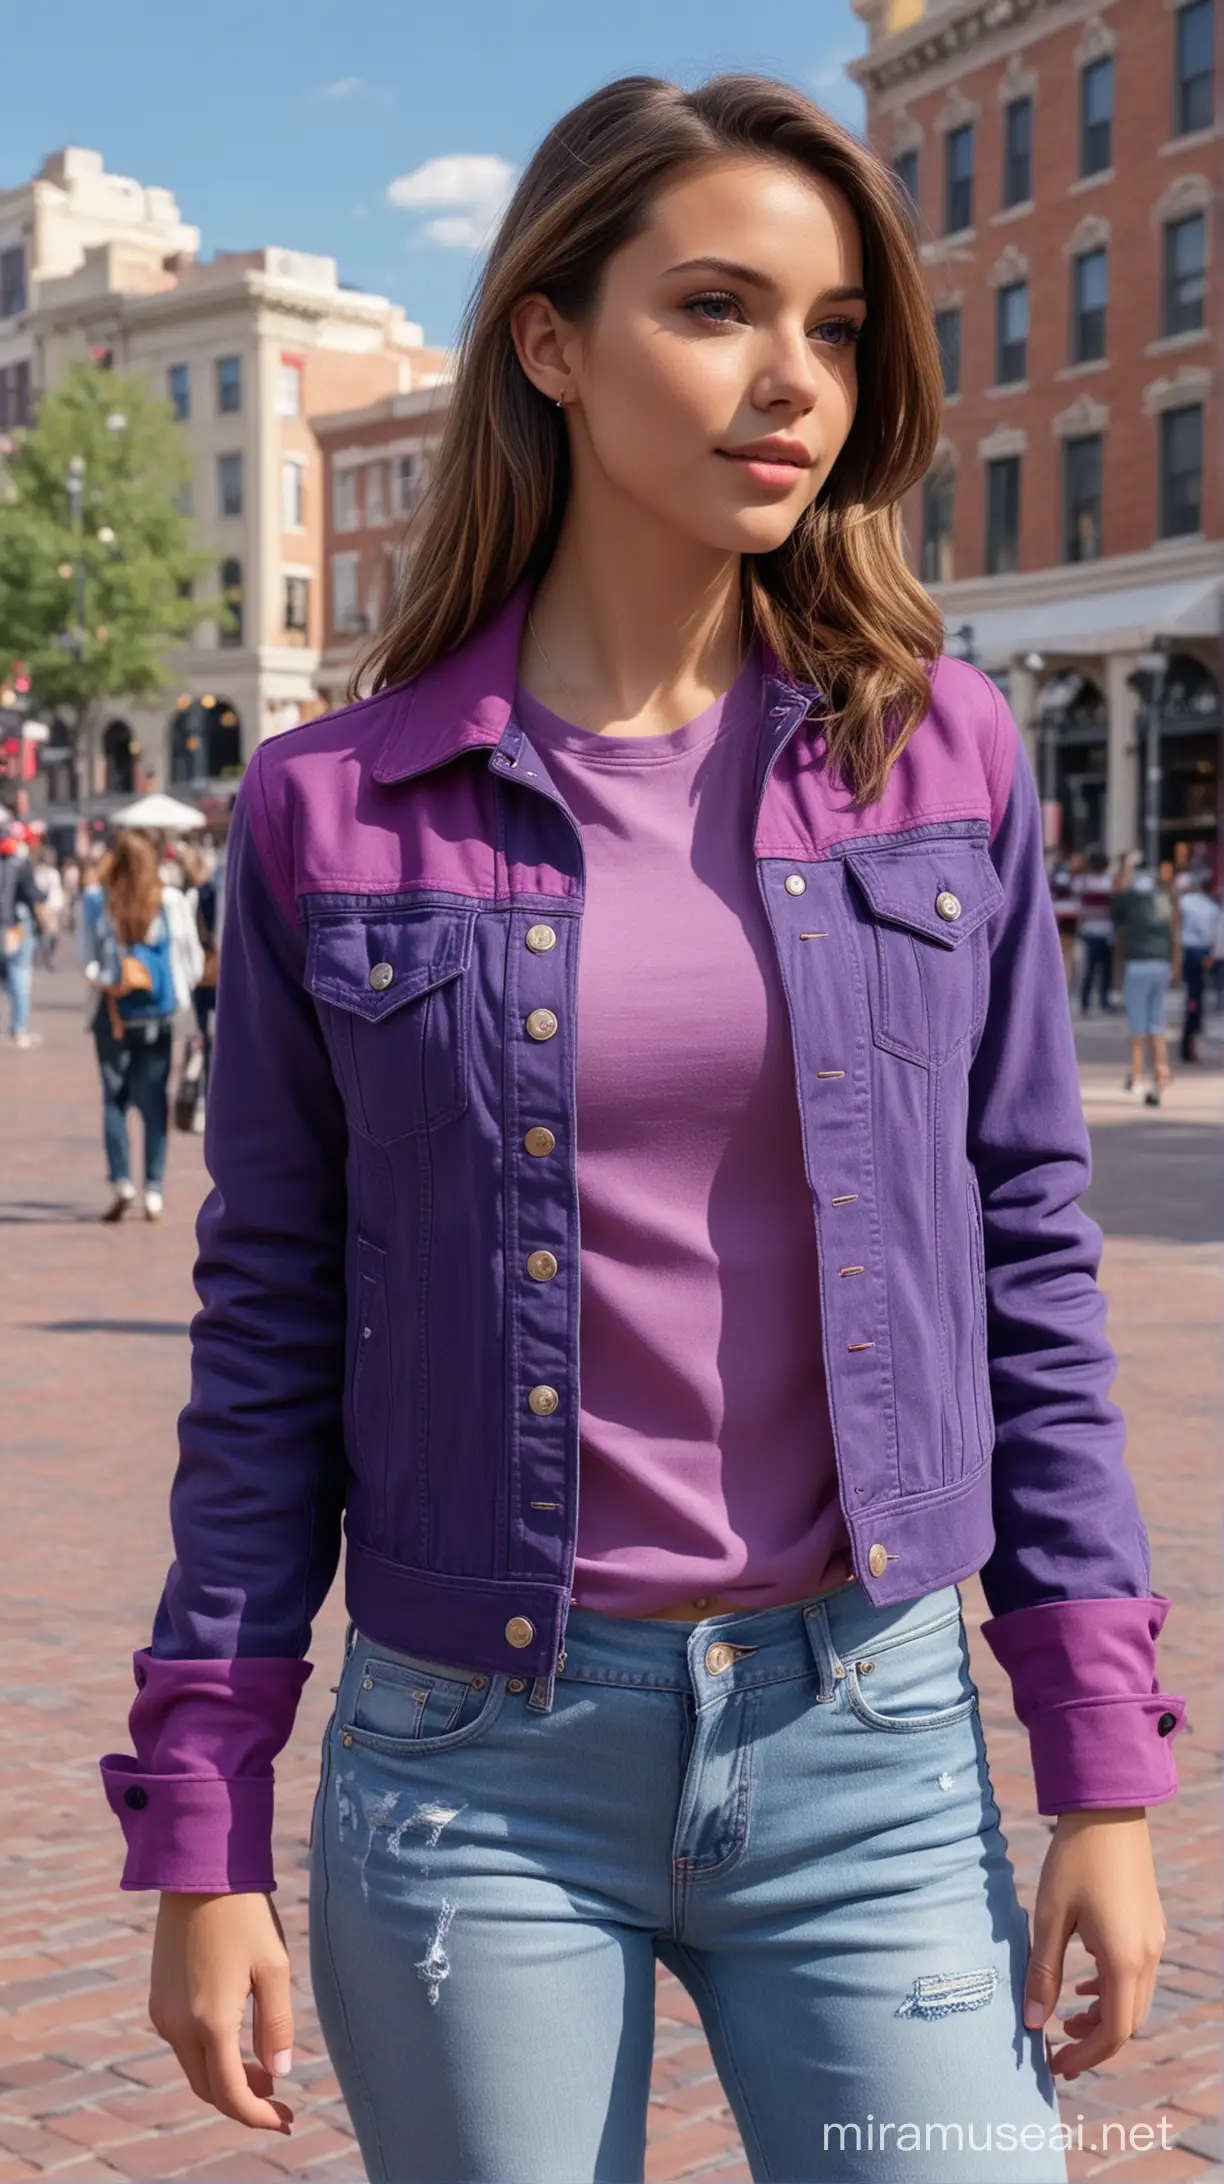 4k Ai art front view beautiful USA girl ear tops multiple colour jeans and purple jacket in USA town square